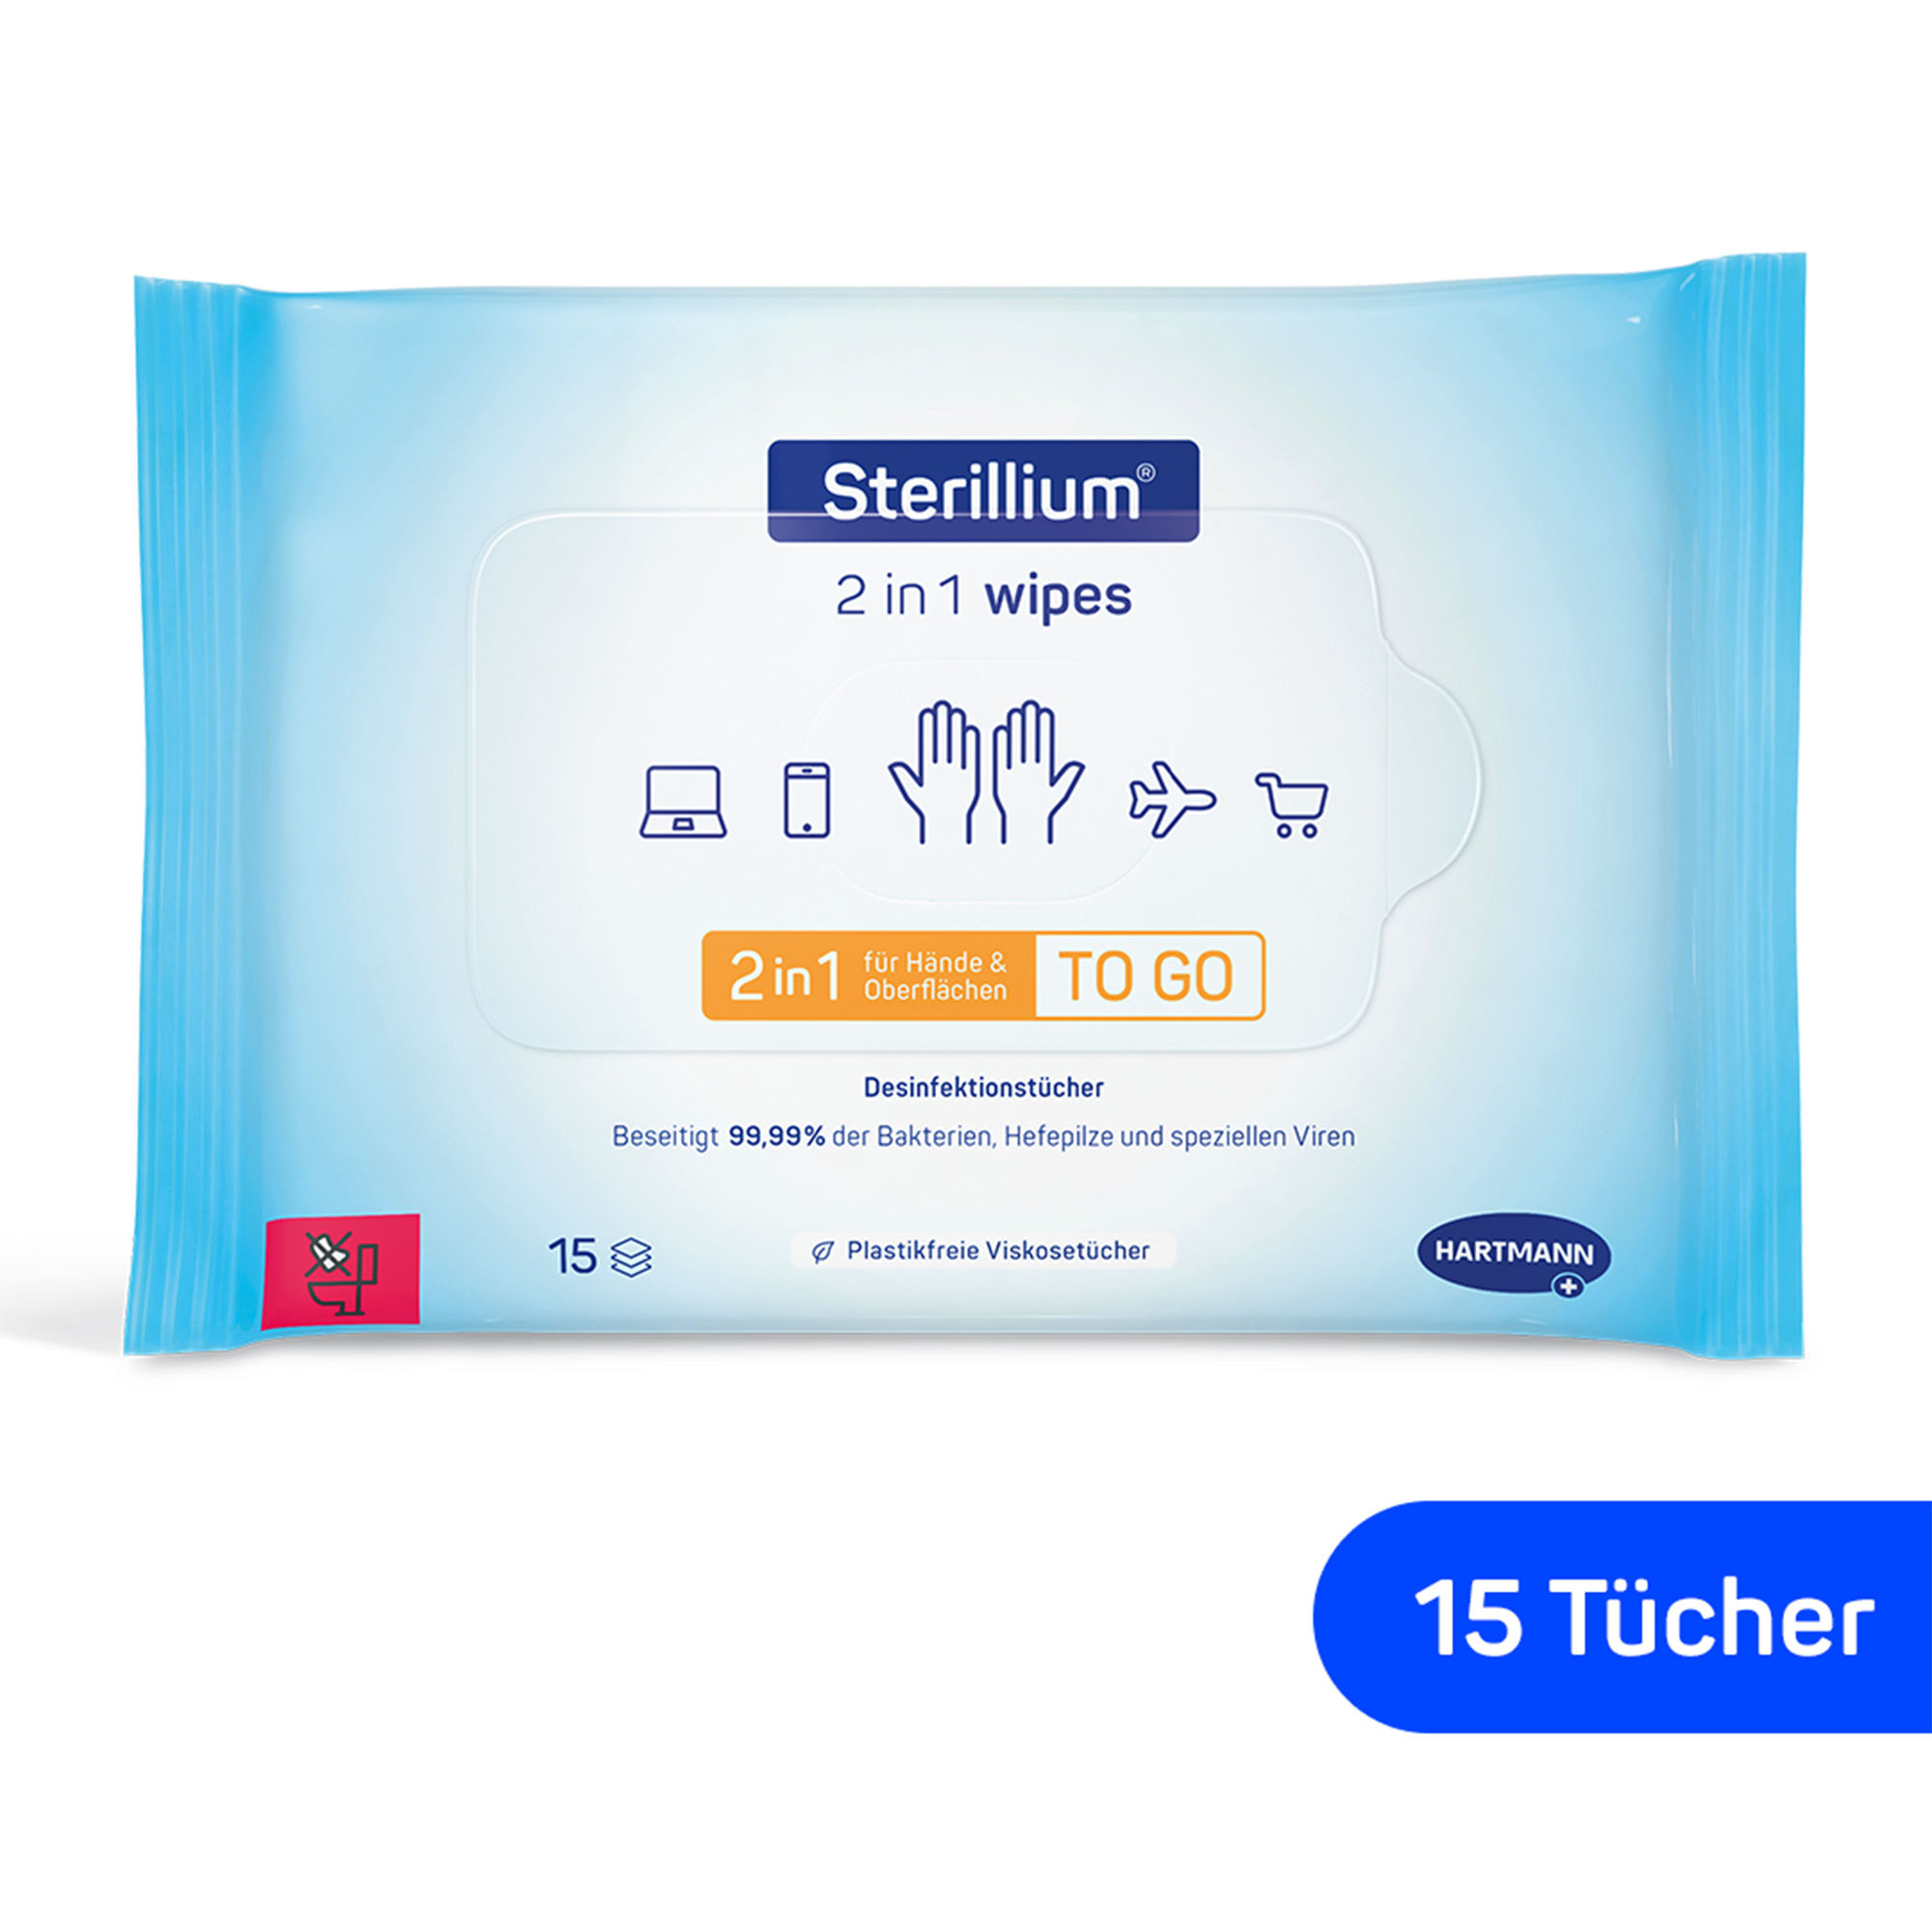 Hartmann Sterillium® 2 in 1 wipes, hand and surface disinfection wipe